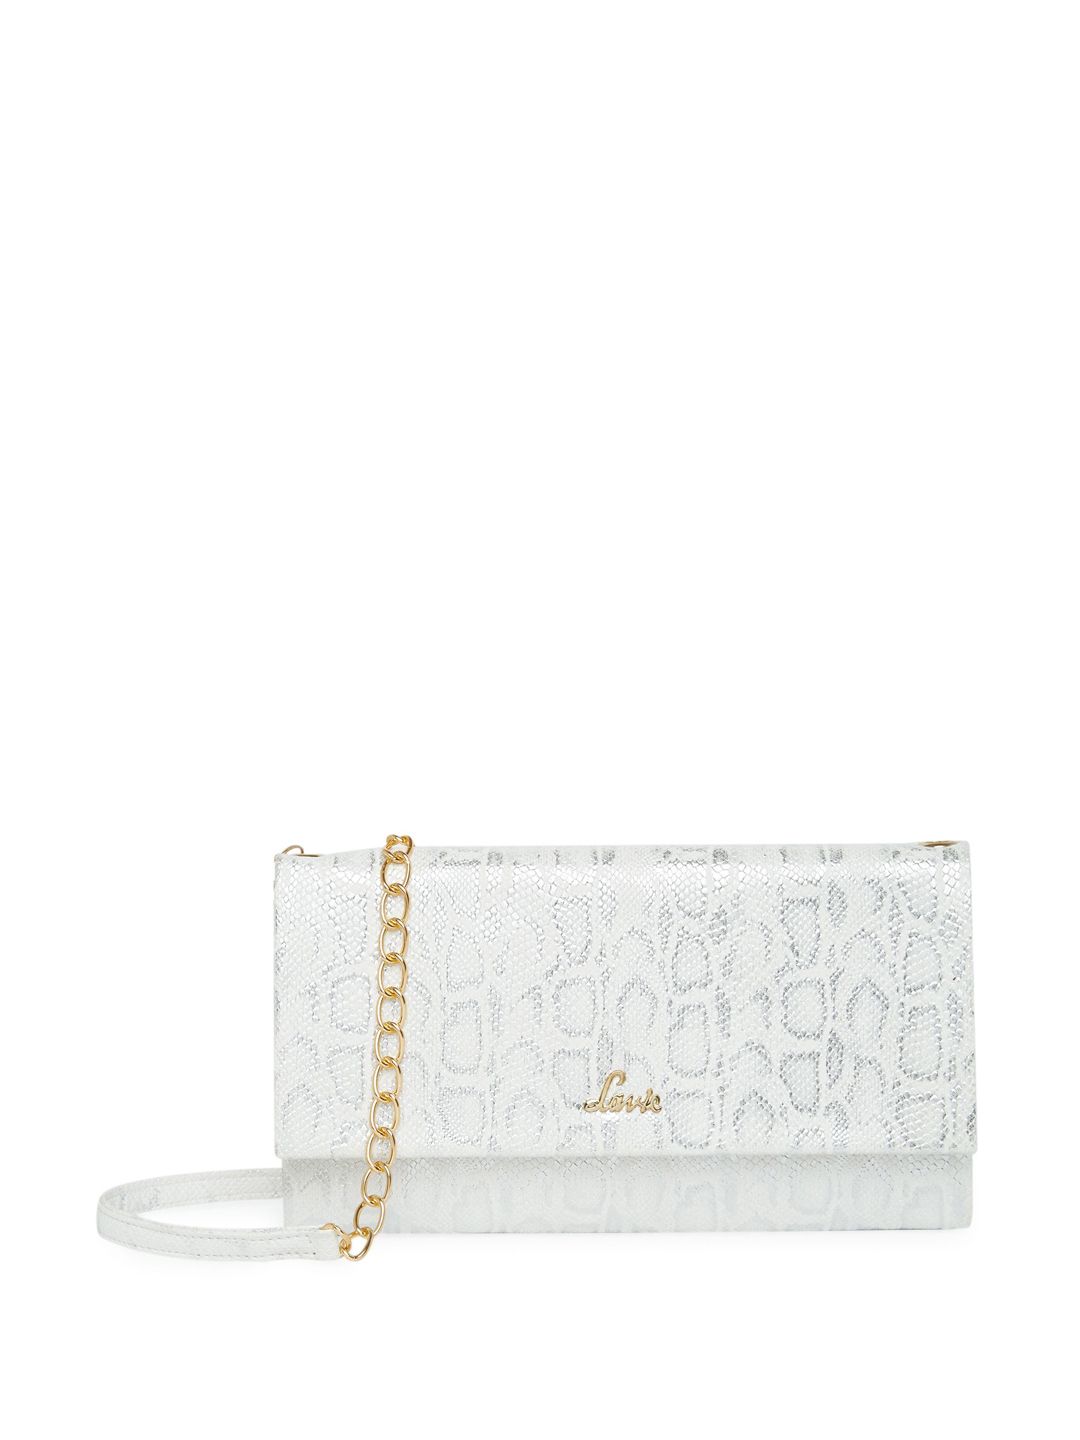 Lavie White Textured PU Structured Sling Bag Price in India